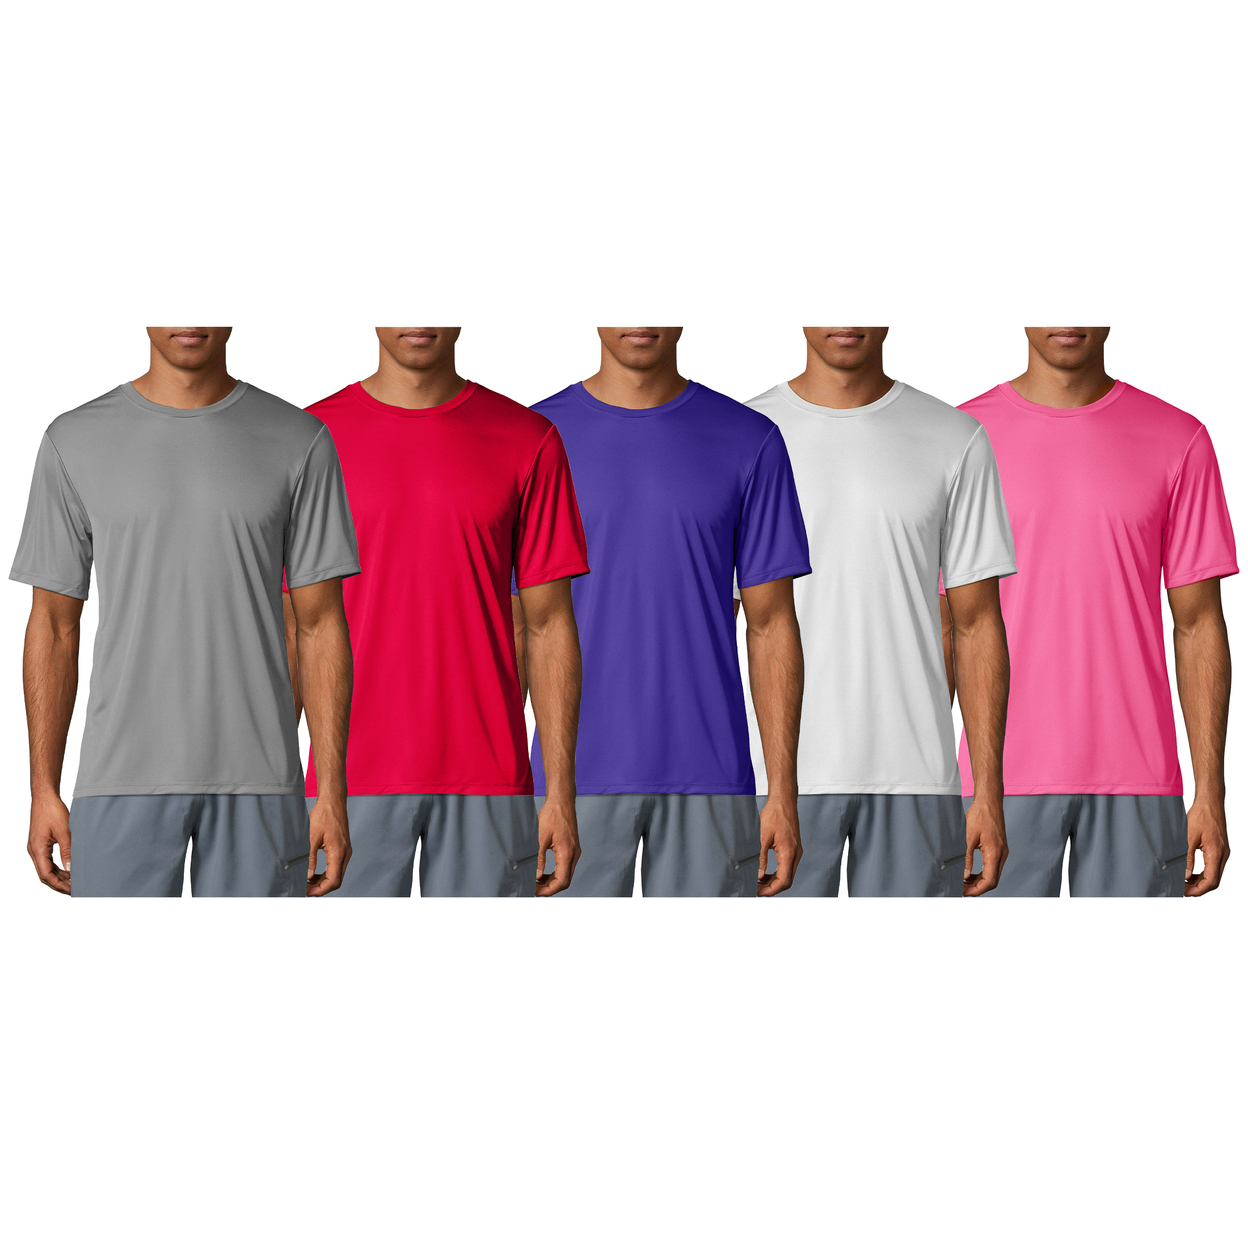 Multi-Pack: Men's Moisture Wicking Cool Dri-Fit Performance Short Sleeve Crew Neck T-Shirts - 3-pack, Large